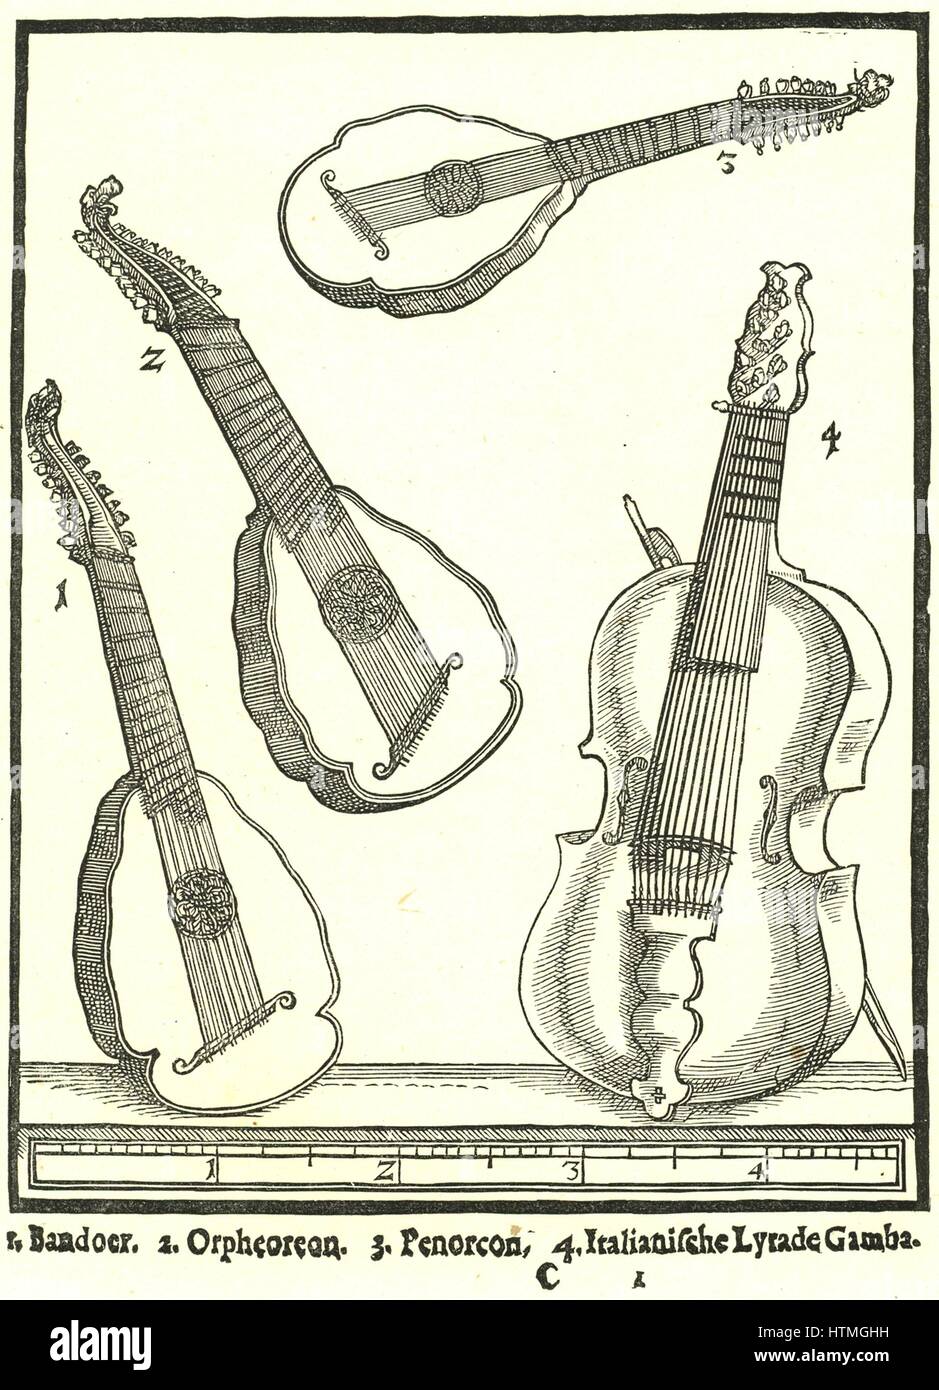 Stringed Instruments. 1: Bandoer, 2: Penorcon, 3: Orpheoreon, forms of Cittern and played with a plectrum. 4: Lyra da Gamba, bass form of the Lyra, played with a bow. Woodcut from Michael Praetorius 'Syntagma Musicum', 1615-1620. Stock Photo